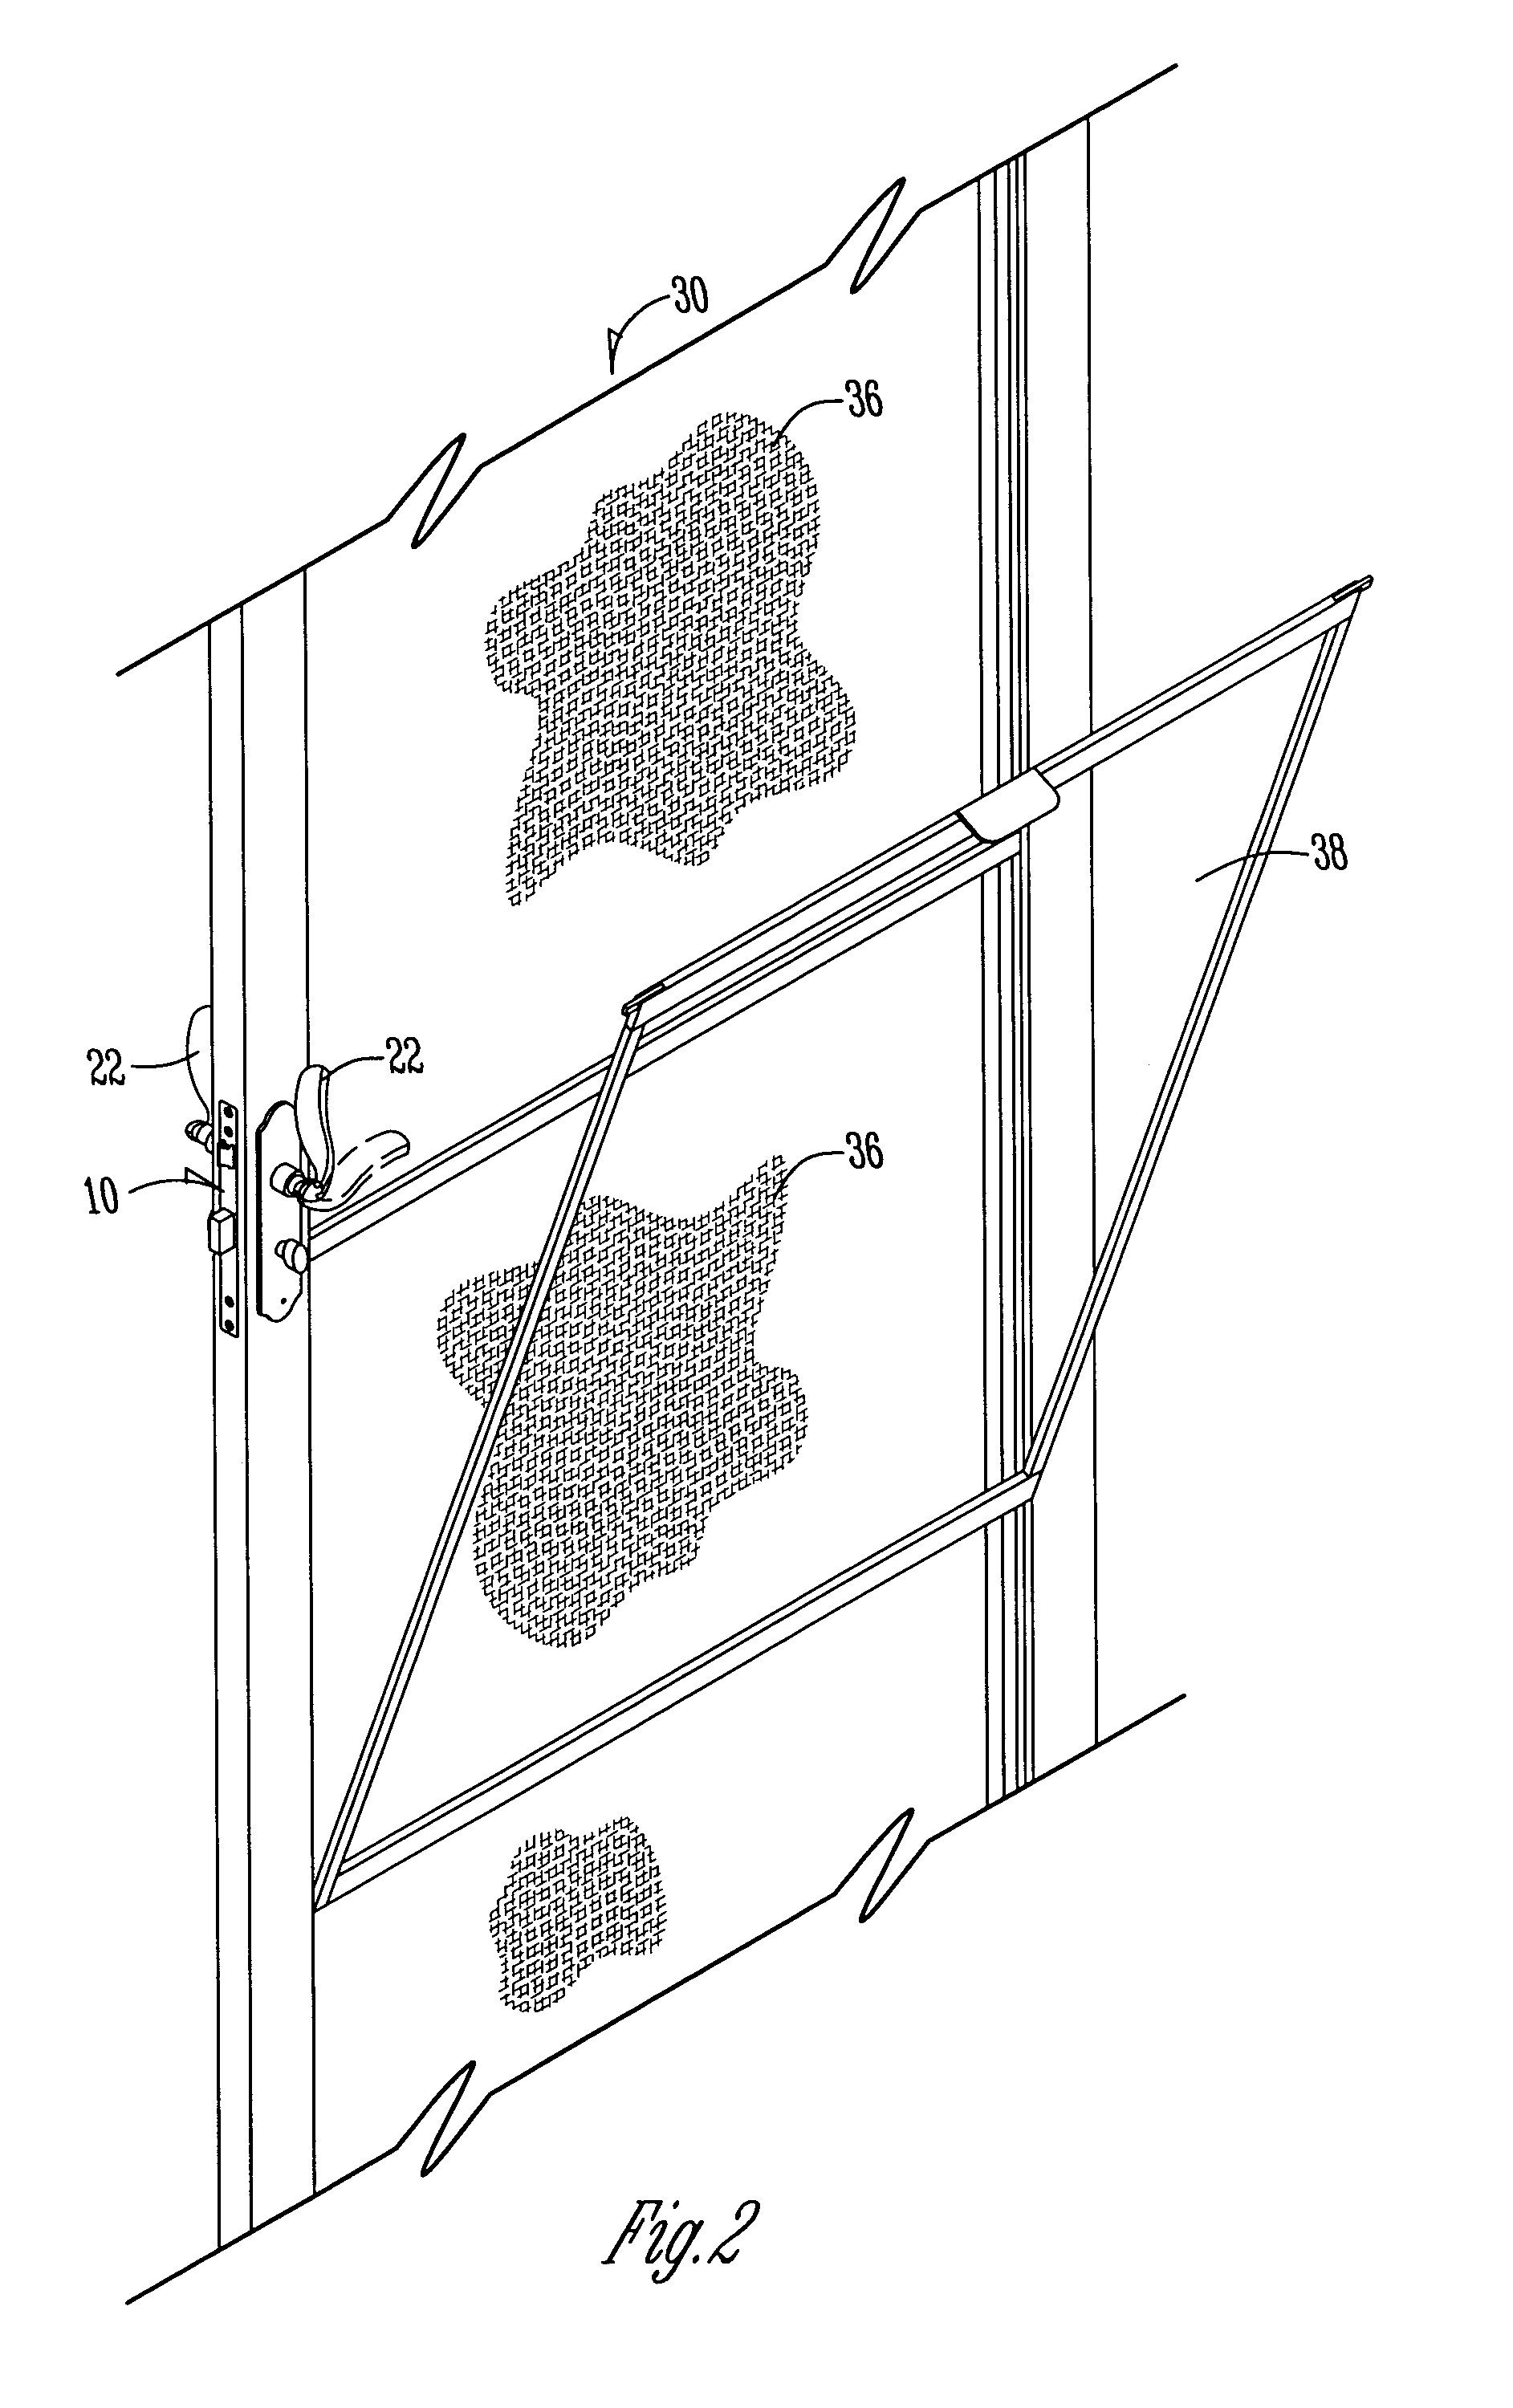 Storm door with a lift-up lock case mortise and method of use